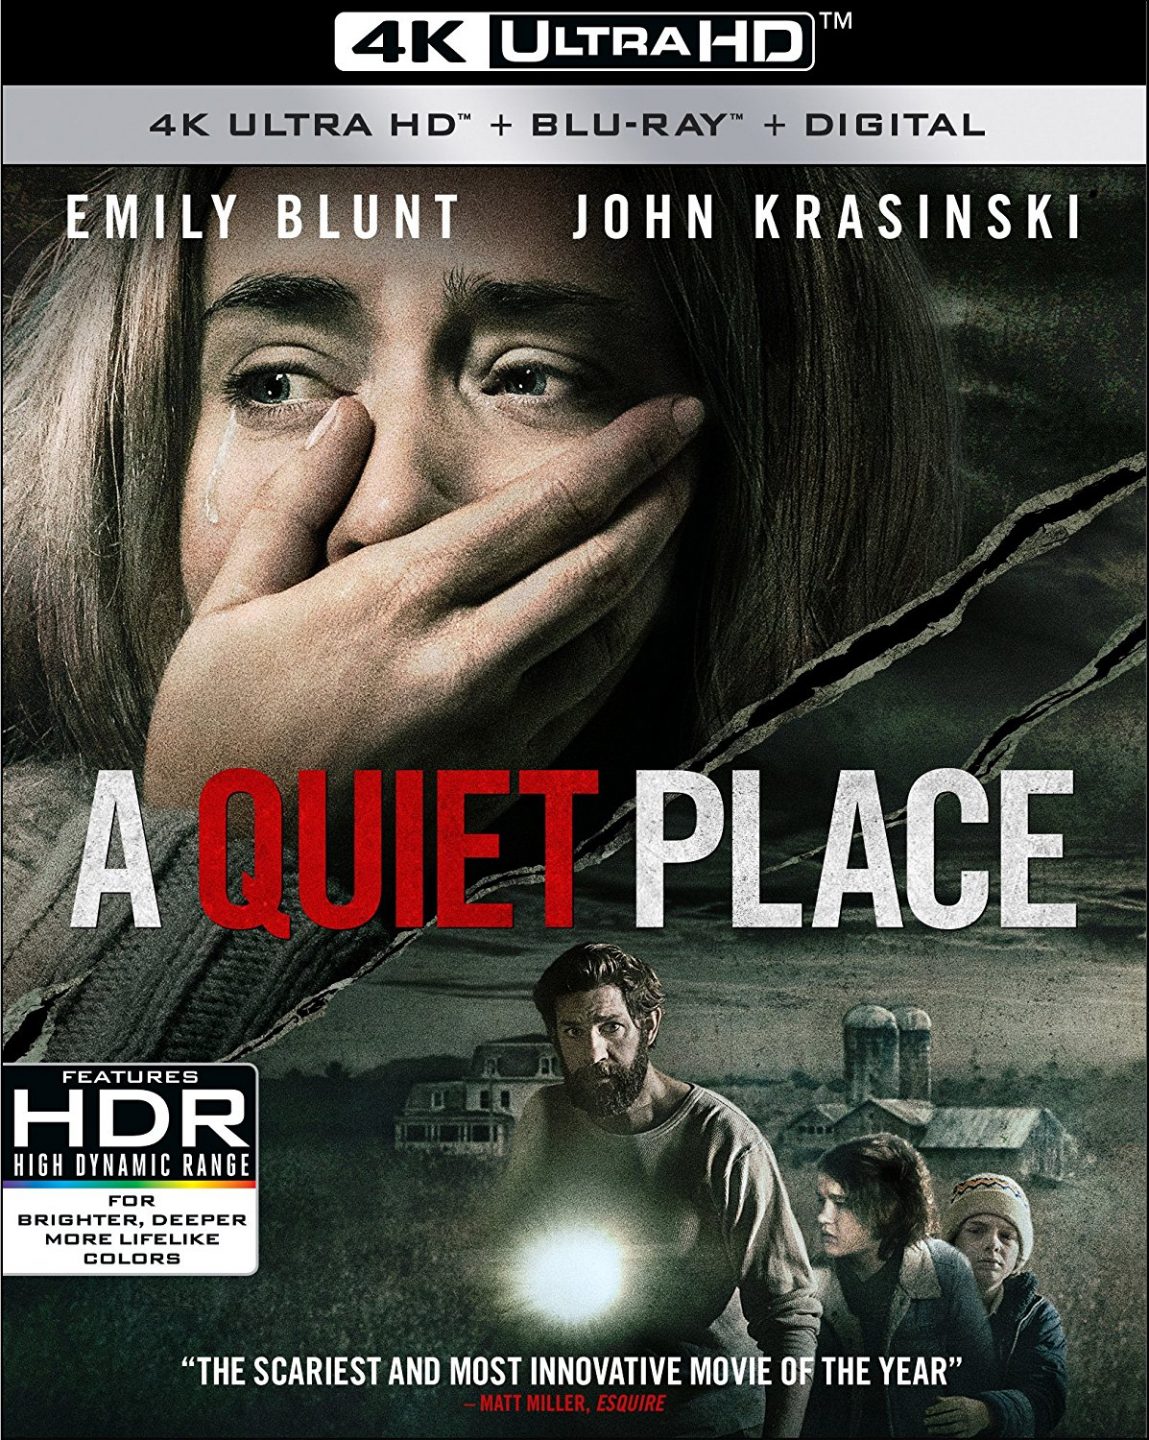 A Quiet Place 4K Ultra HD cover (Paramount Home Entertainment)